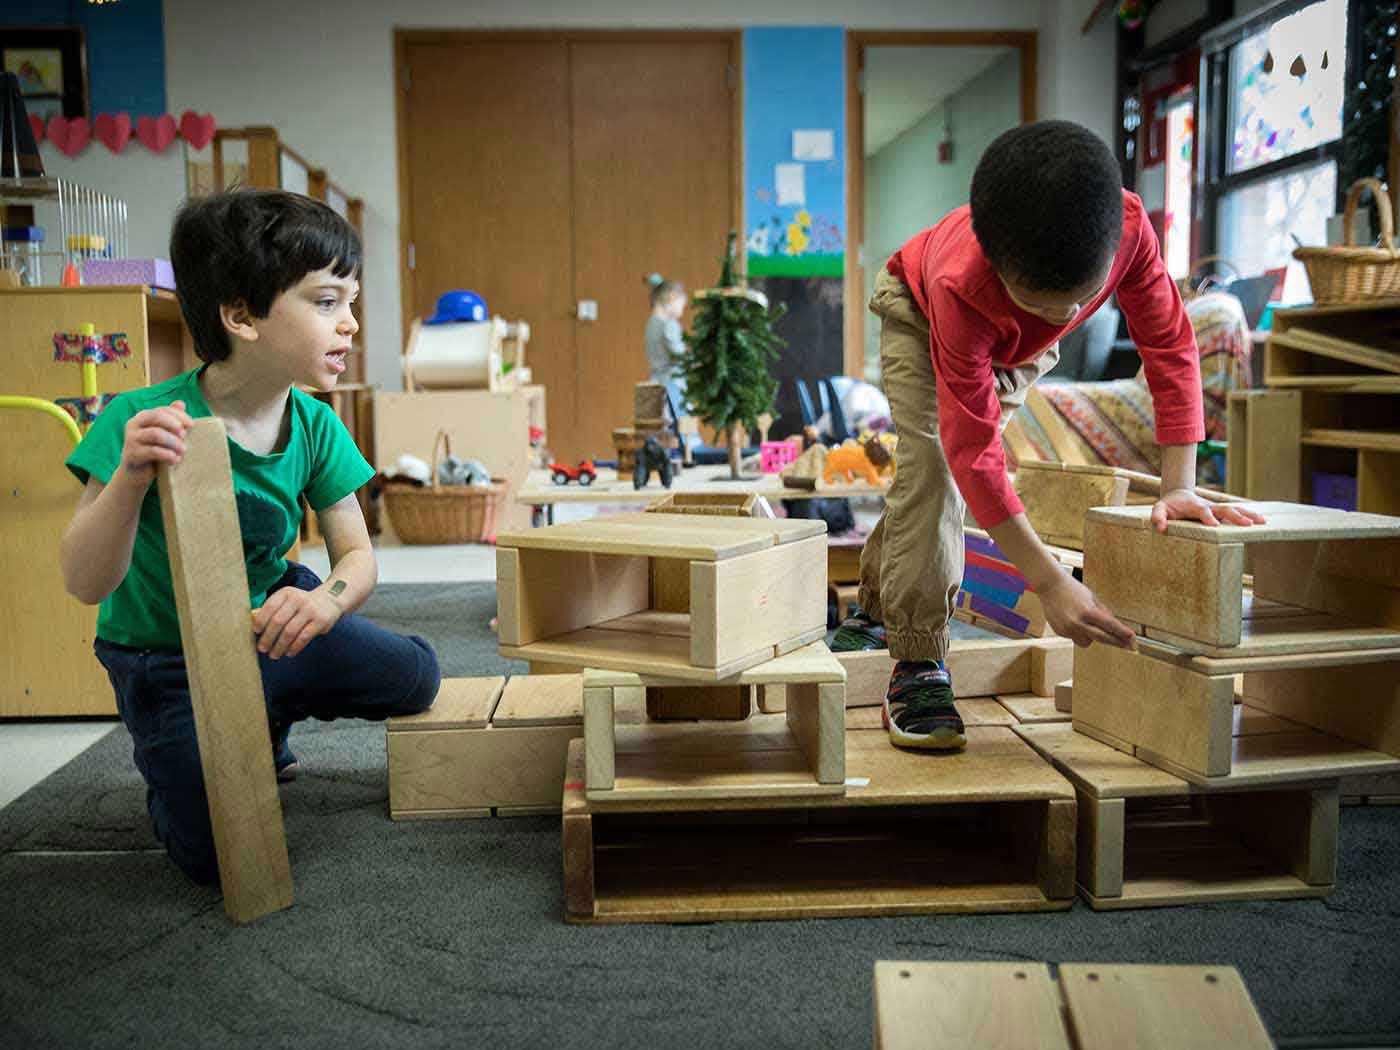 Baker students show the power of play in action